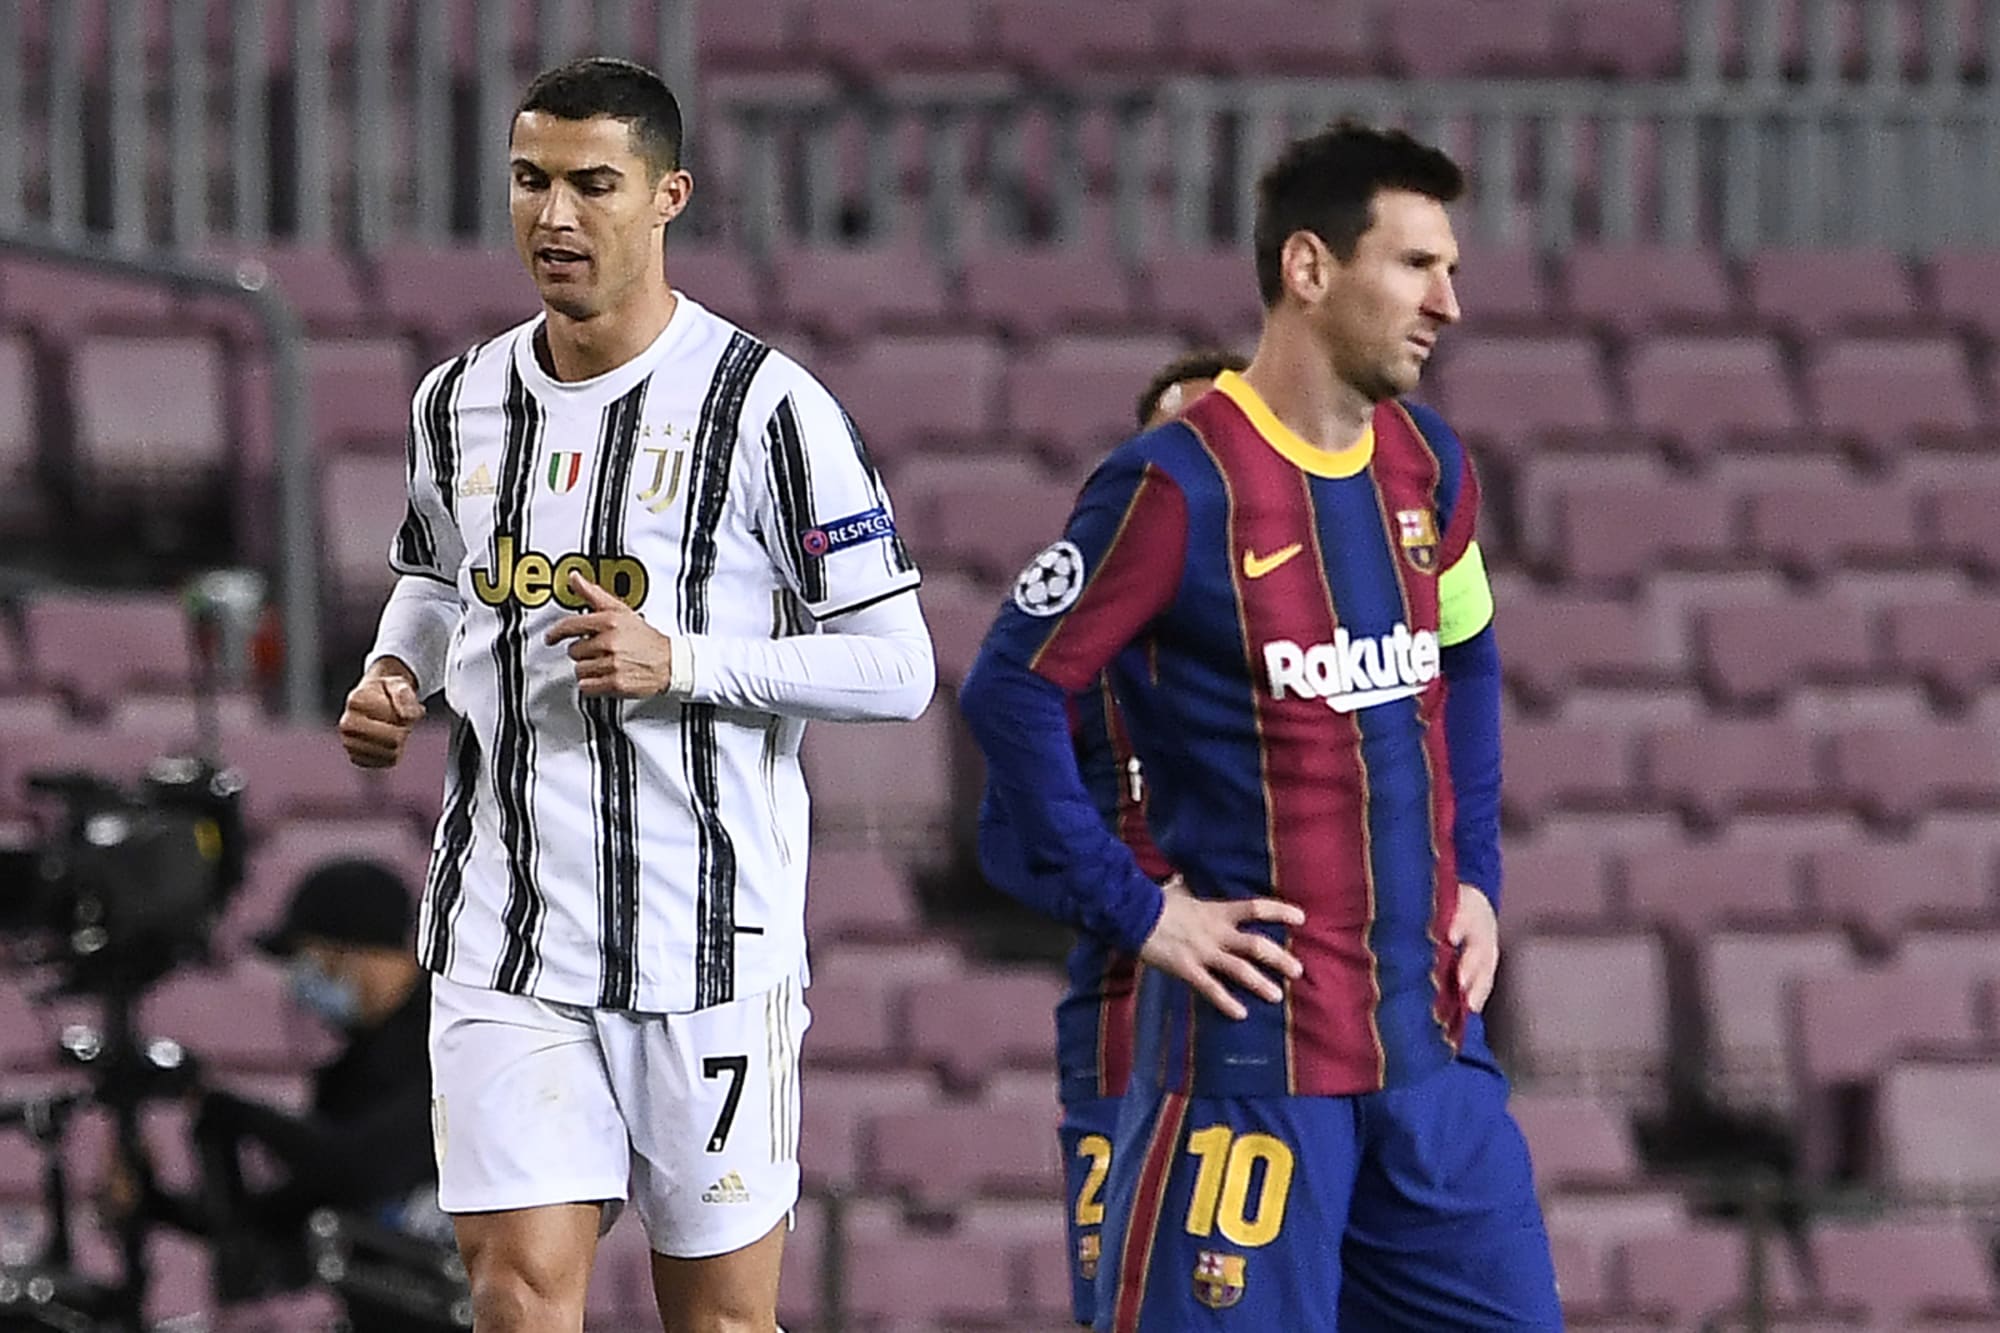 Is Cristiano Ronaldo a better player than Lionel Messi?, Manchester United